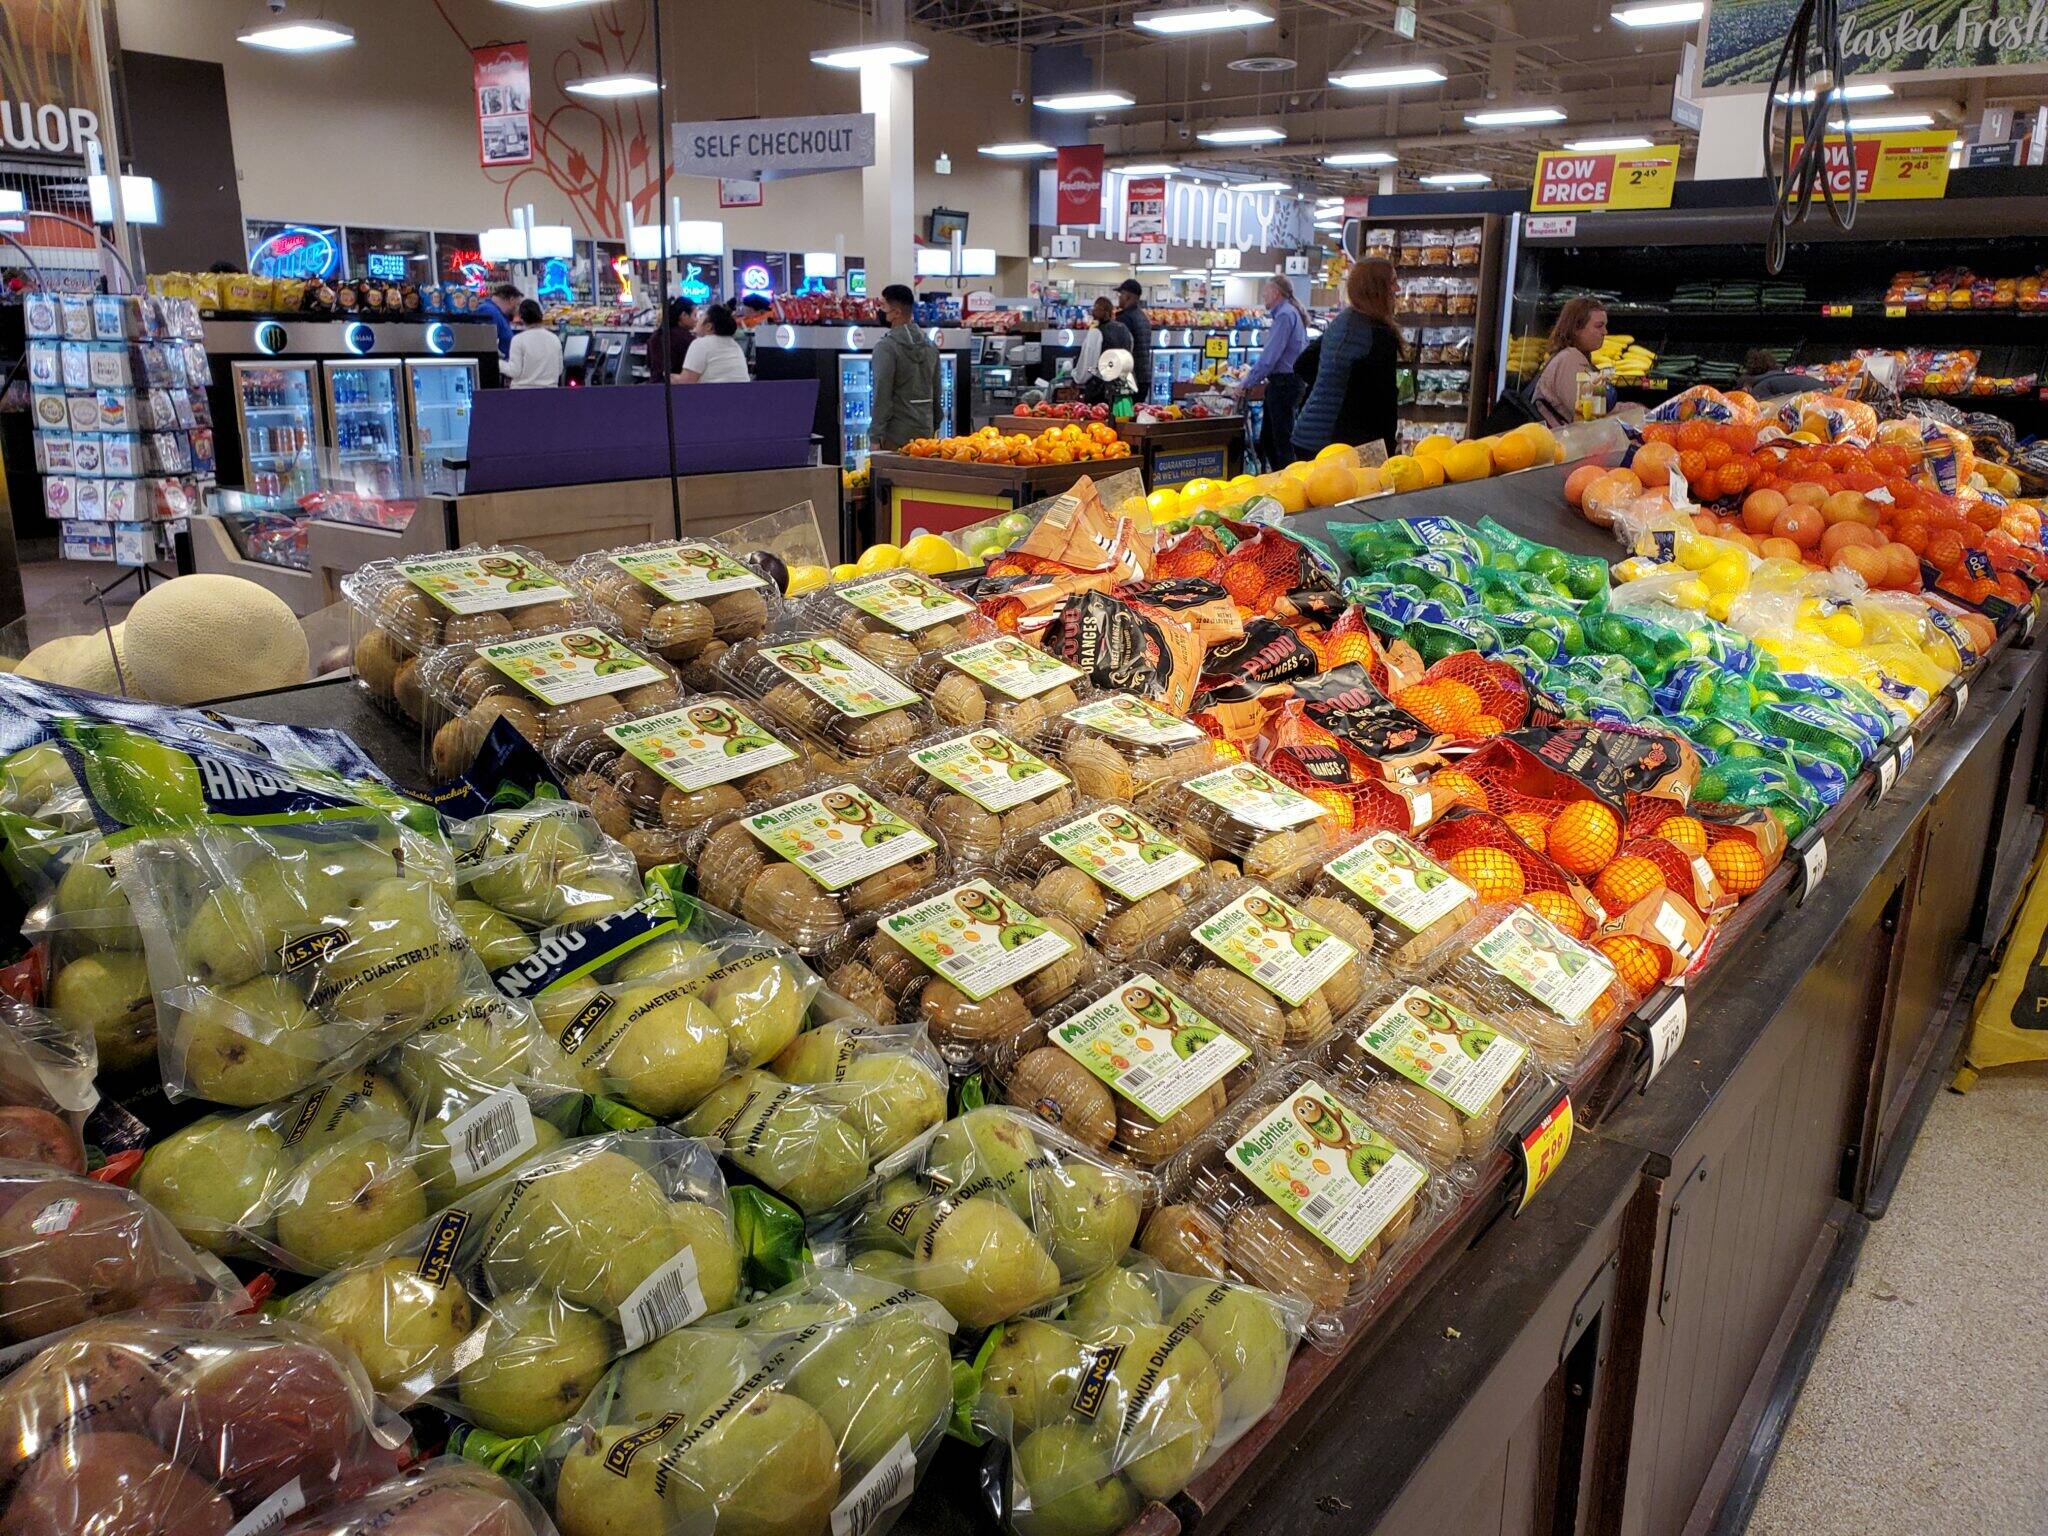 Fruit is displayed at an Anchorage grocery store. Overall consumer prices in Alaska’s largest city were up by an annual rate of 7.5% as of April, according to the Bureau of Labor Statistics. Food prices were up by 11.3%. (Photo by Yereth Rosen/Alaska Beacon)